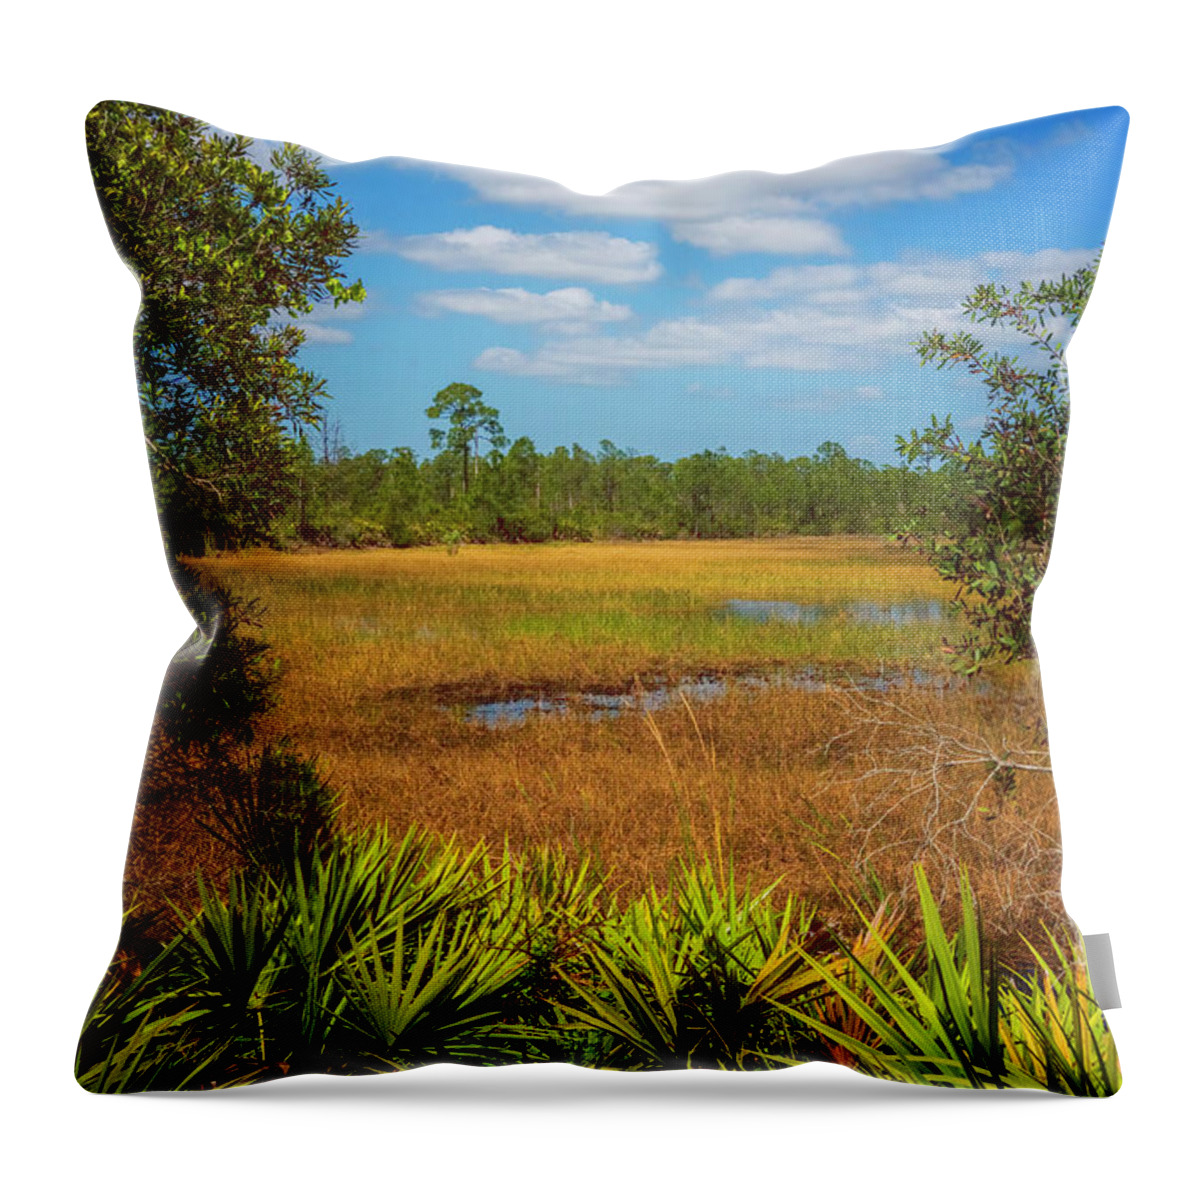 North Port Florida Throw Pillow featuring the photograph Florida Marsh by Tom Singleton